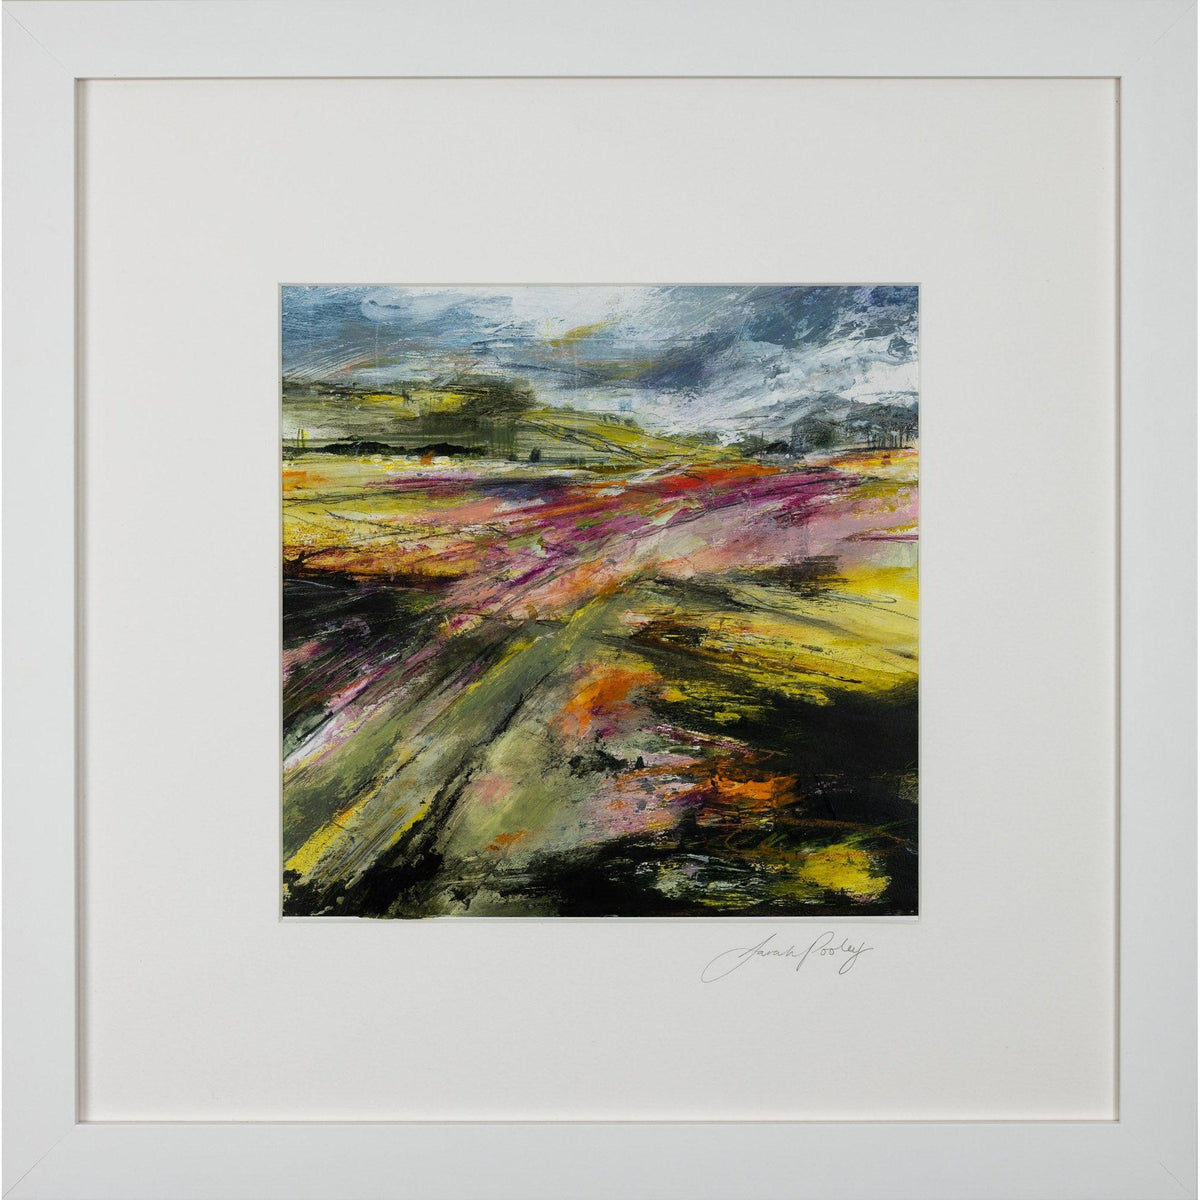 &#39;Fertile land - Combeshead&#39; mixed media original by Sarah Pooley, available at Padstow Gallery, Cornwall.